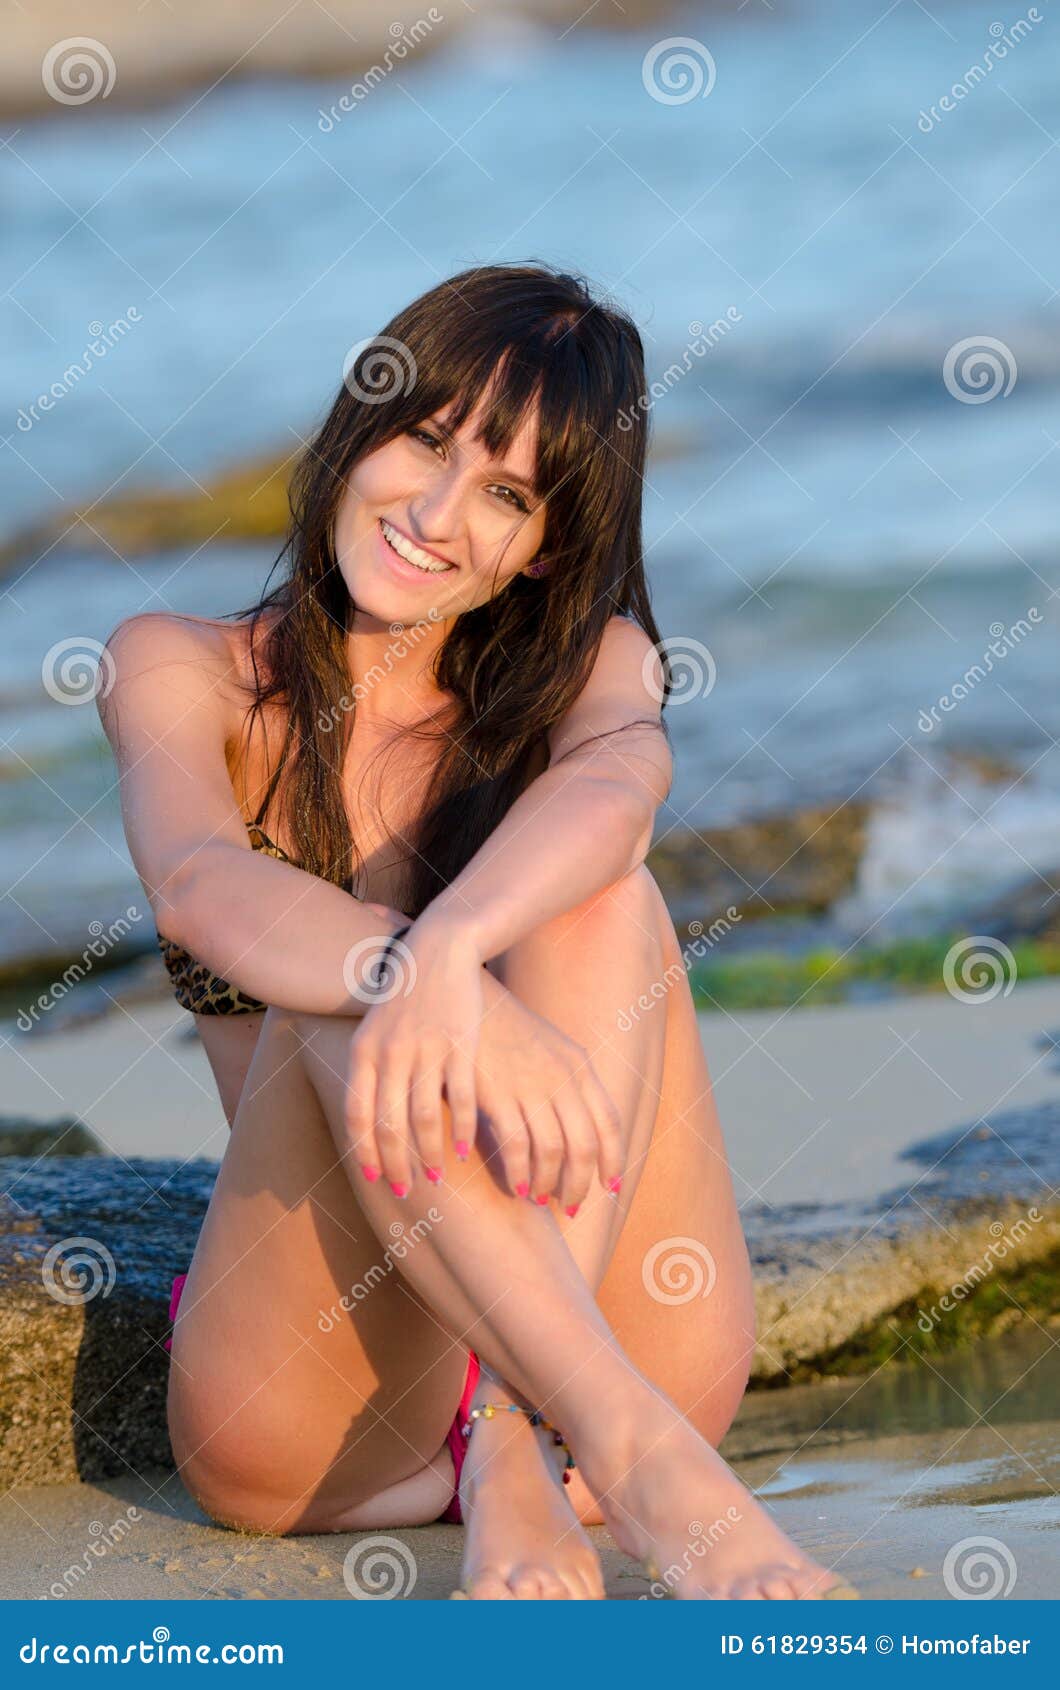 Lady Late Afternoon at the Beach with Bikini Stock Photo